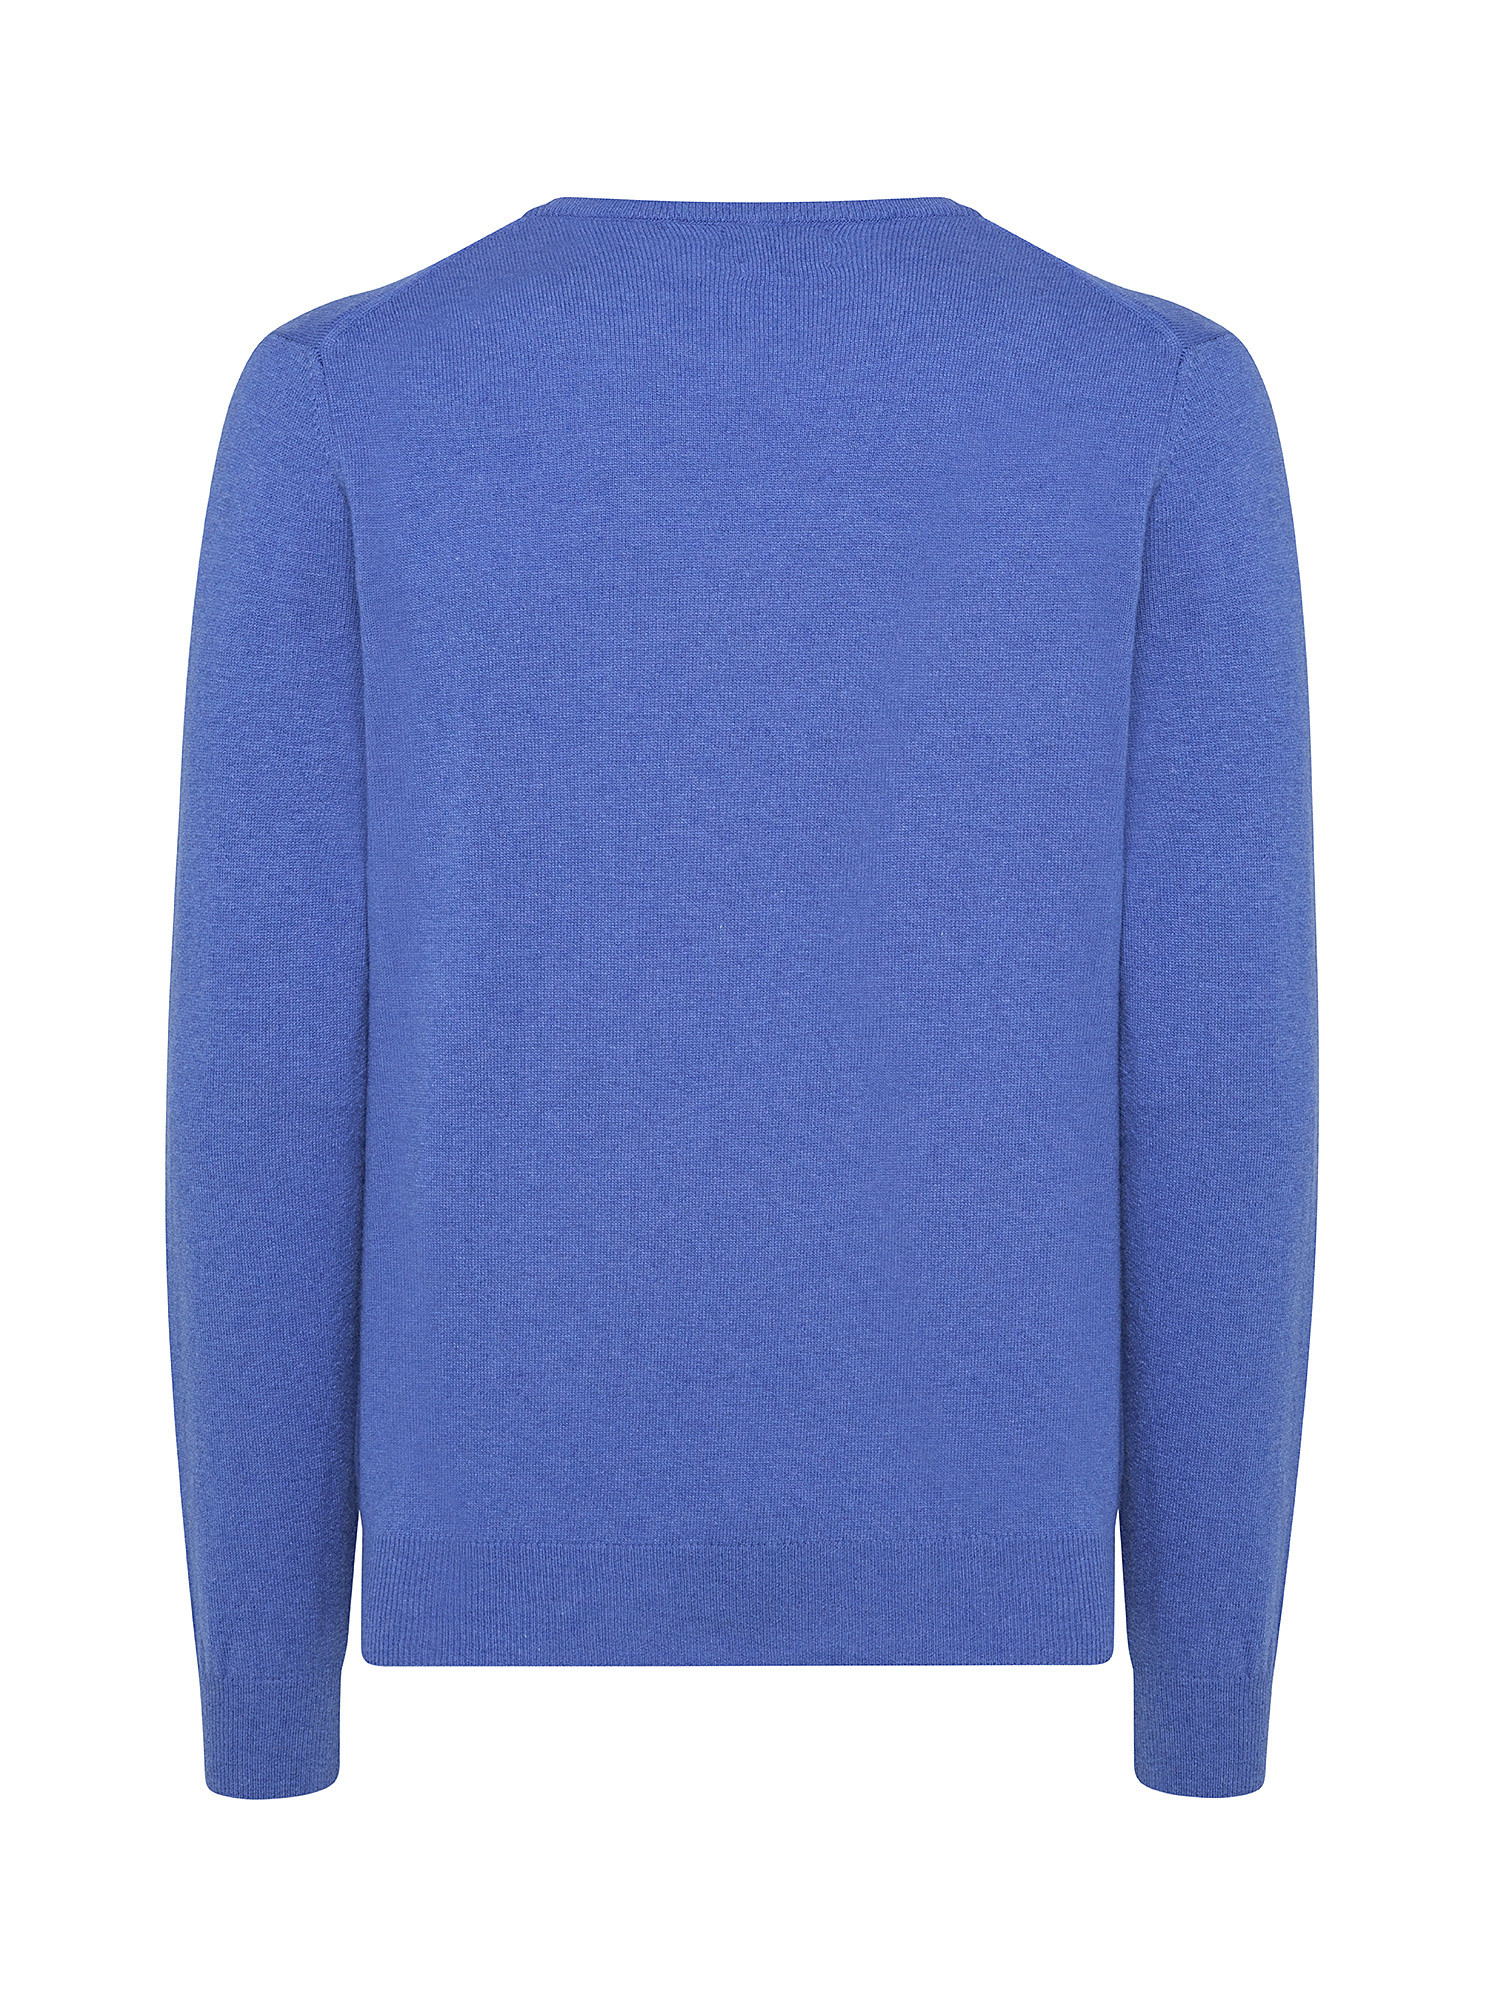 Cashmere Blend crewneck sweater with noble fibers, Aviation Blue, large image number 1